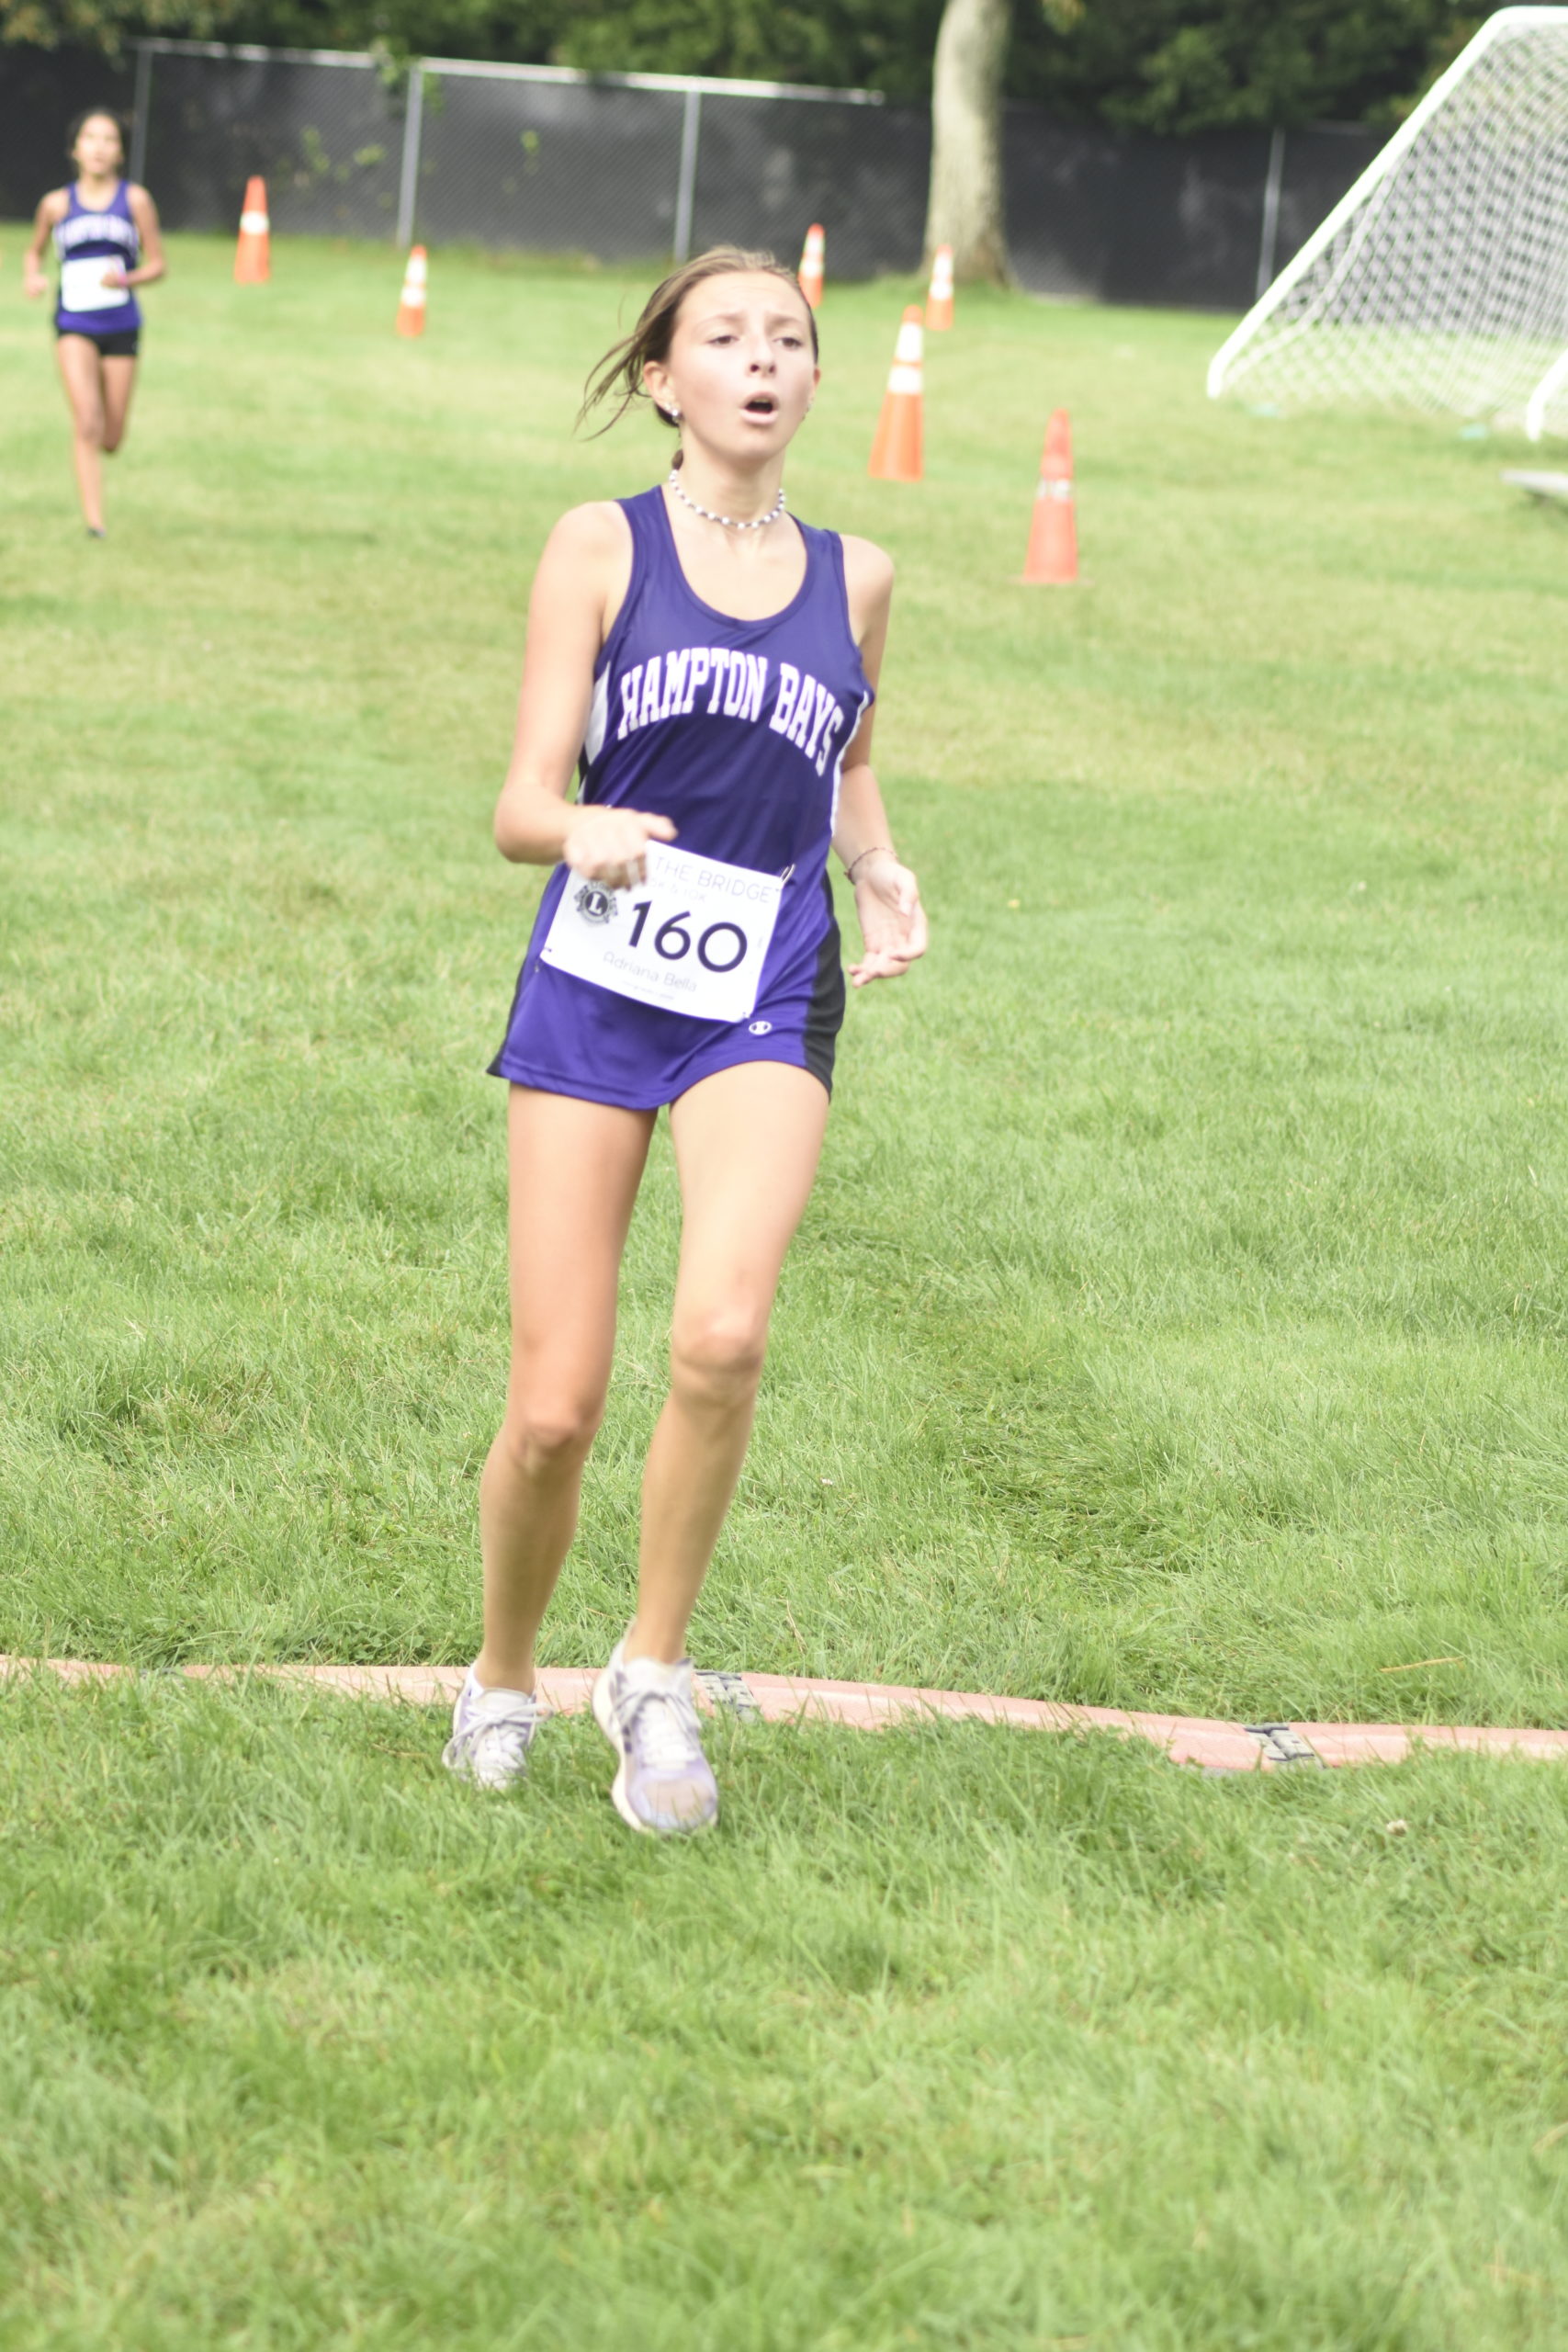 Adriana Bella Tapfer, 13, of Hampton Bays, and a member of the Baymen cross country team, finished second among women.